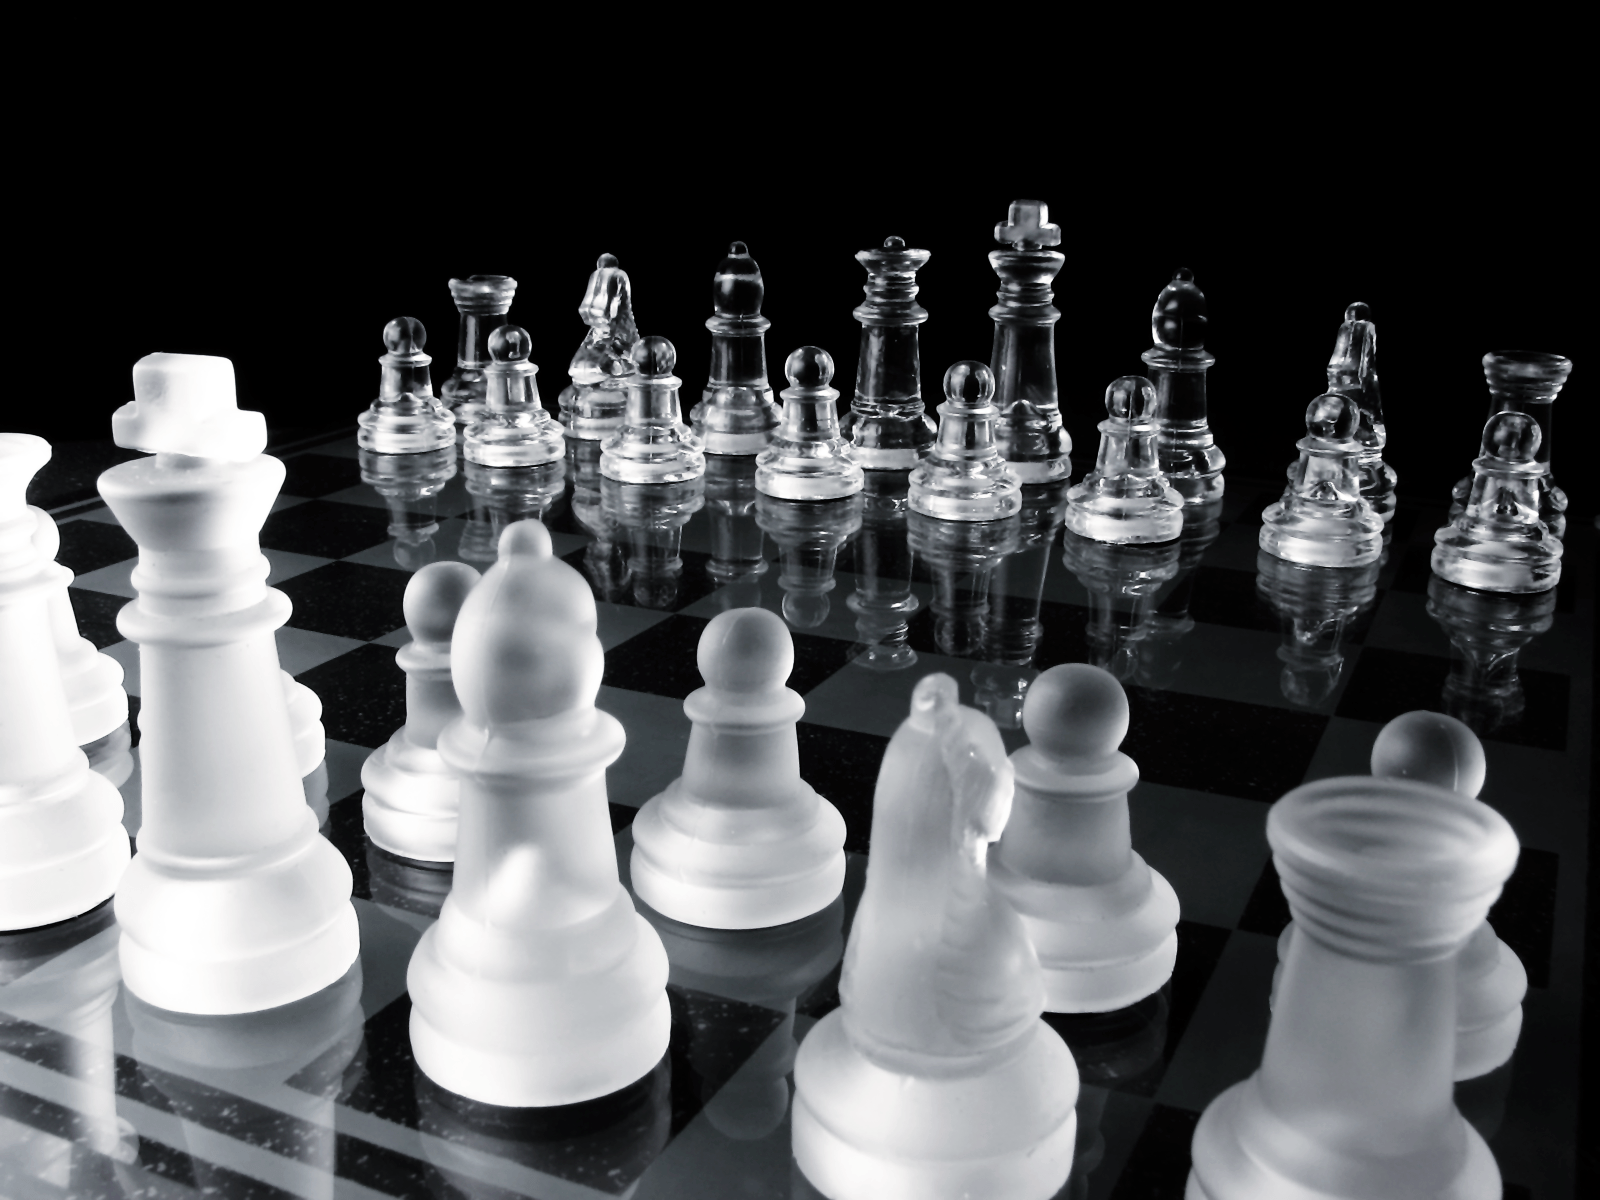 black-and-white-chess-wallpaper-21377-22287-hd-wallpapers-1024x768